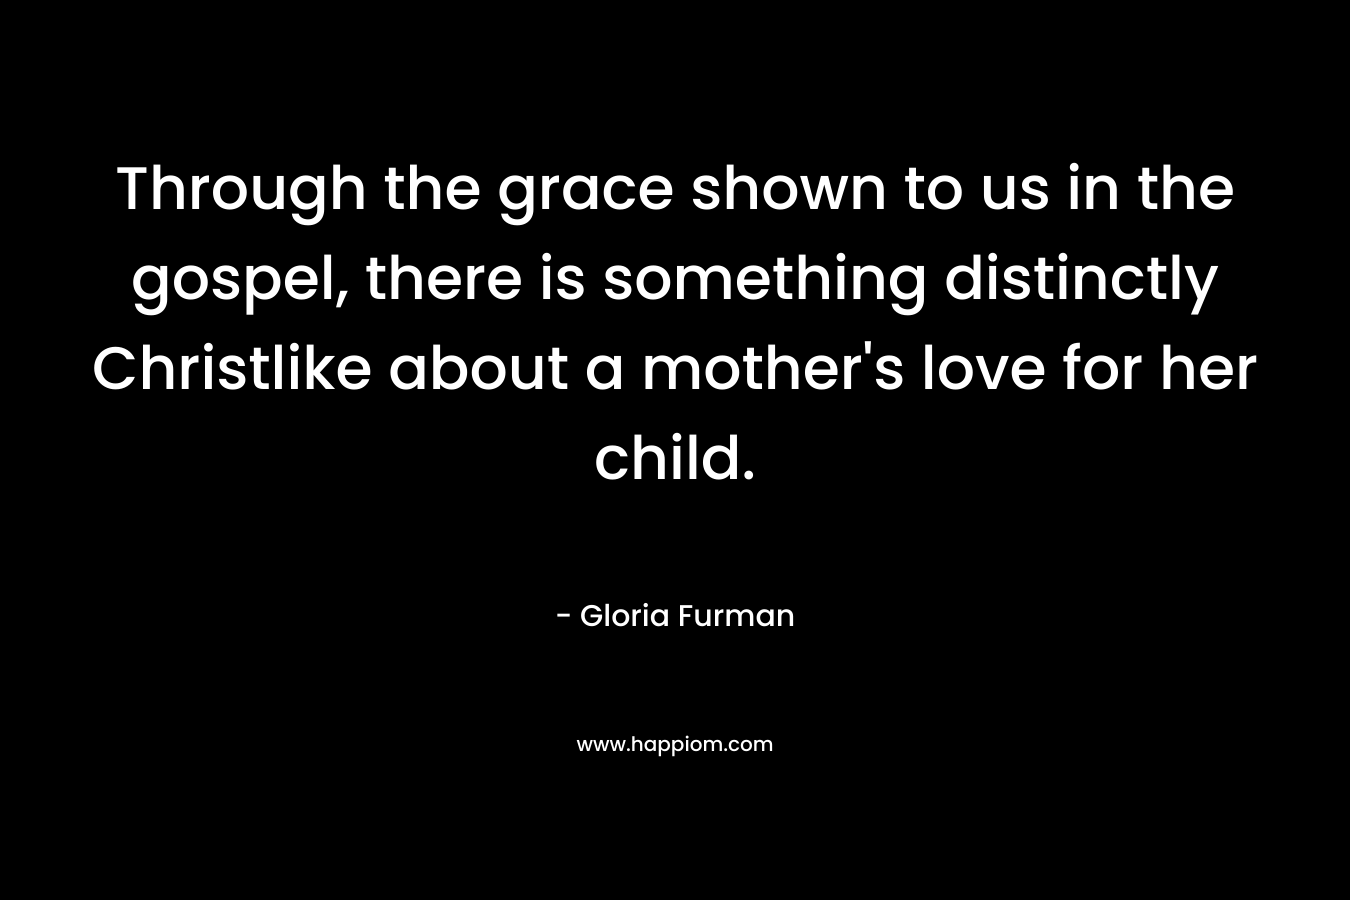 Through the grace shown to us in the gospel, there is something distinctly Christlike about a mother's love for her child.